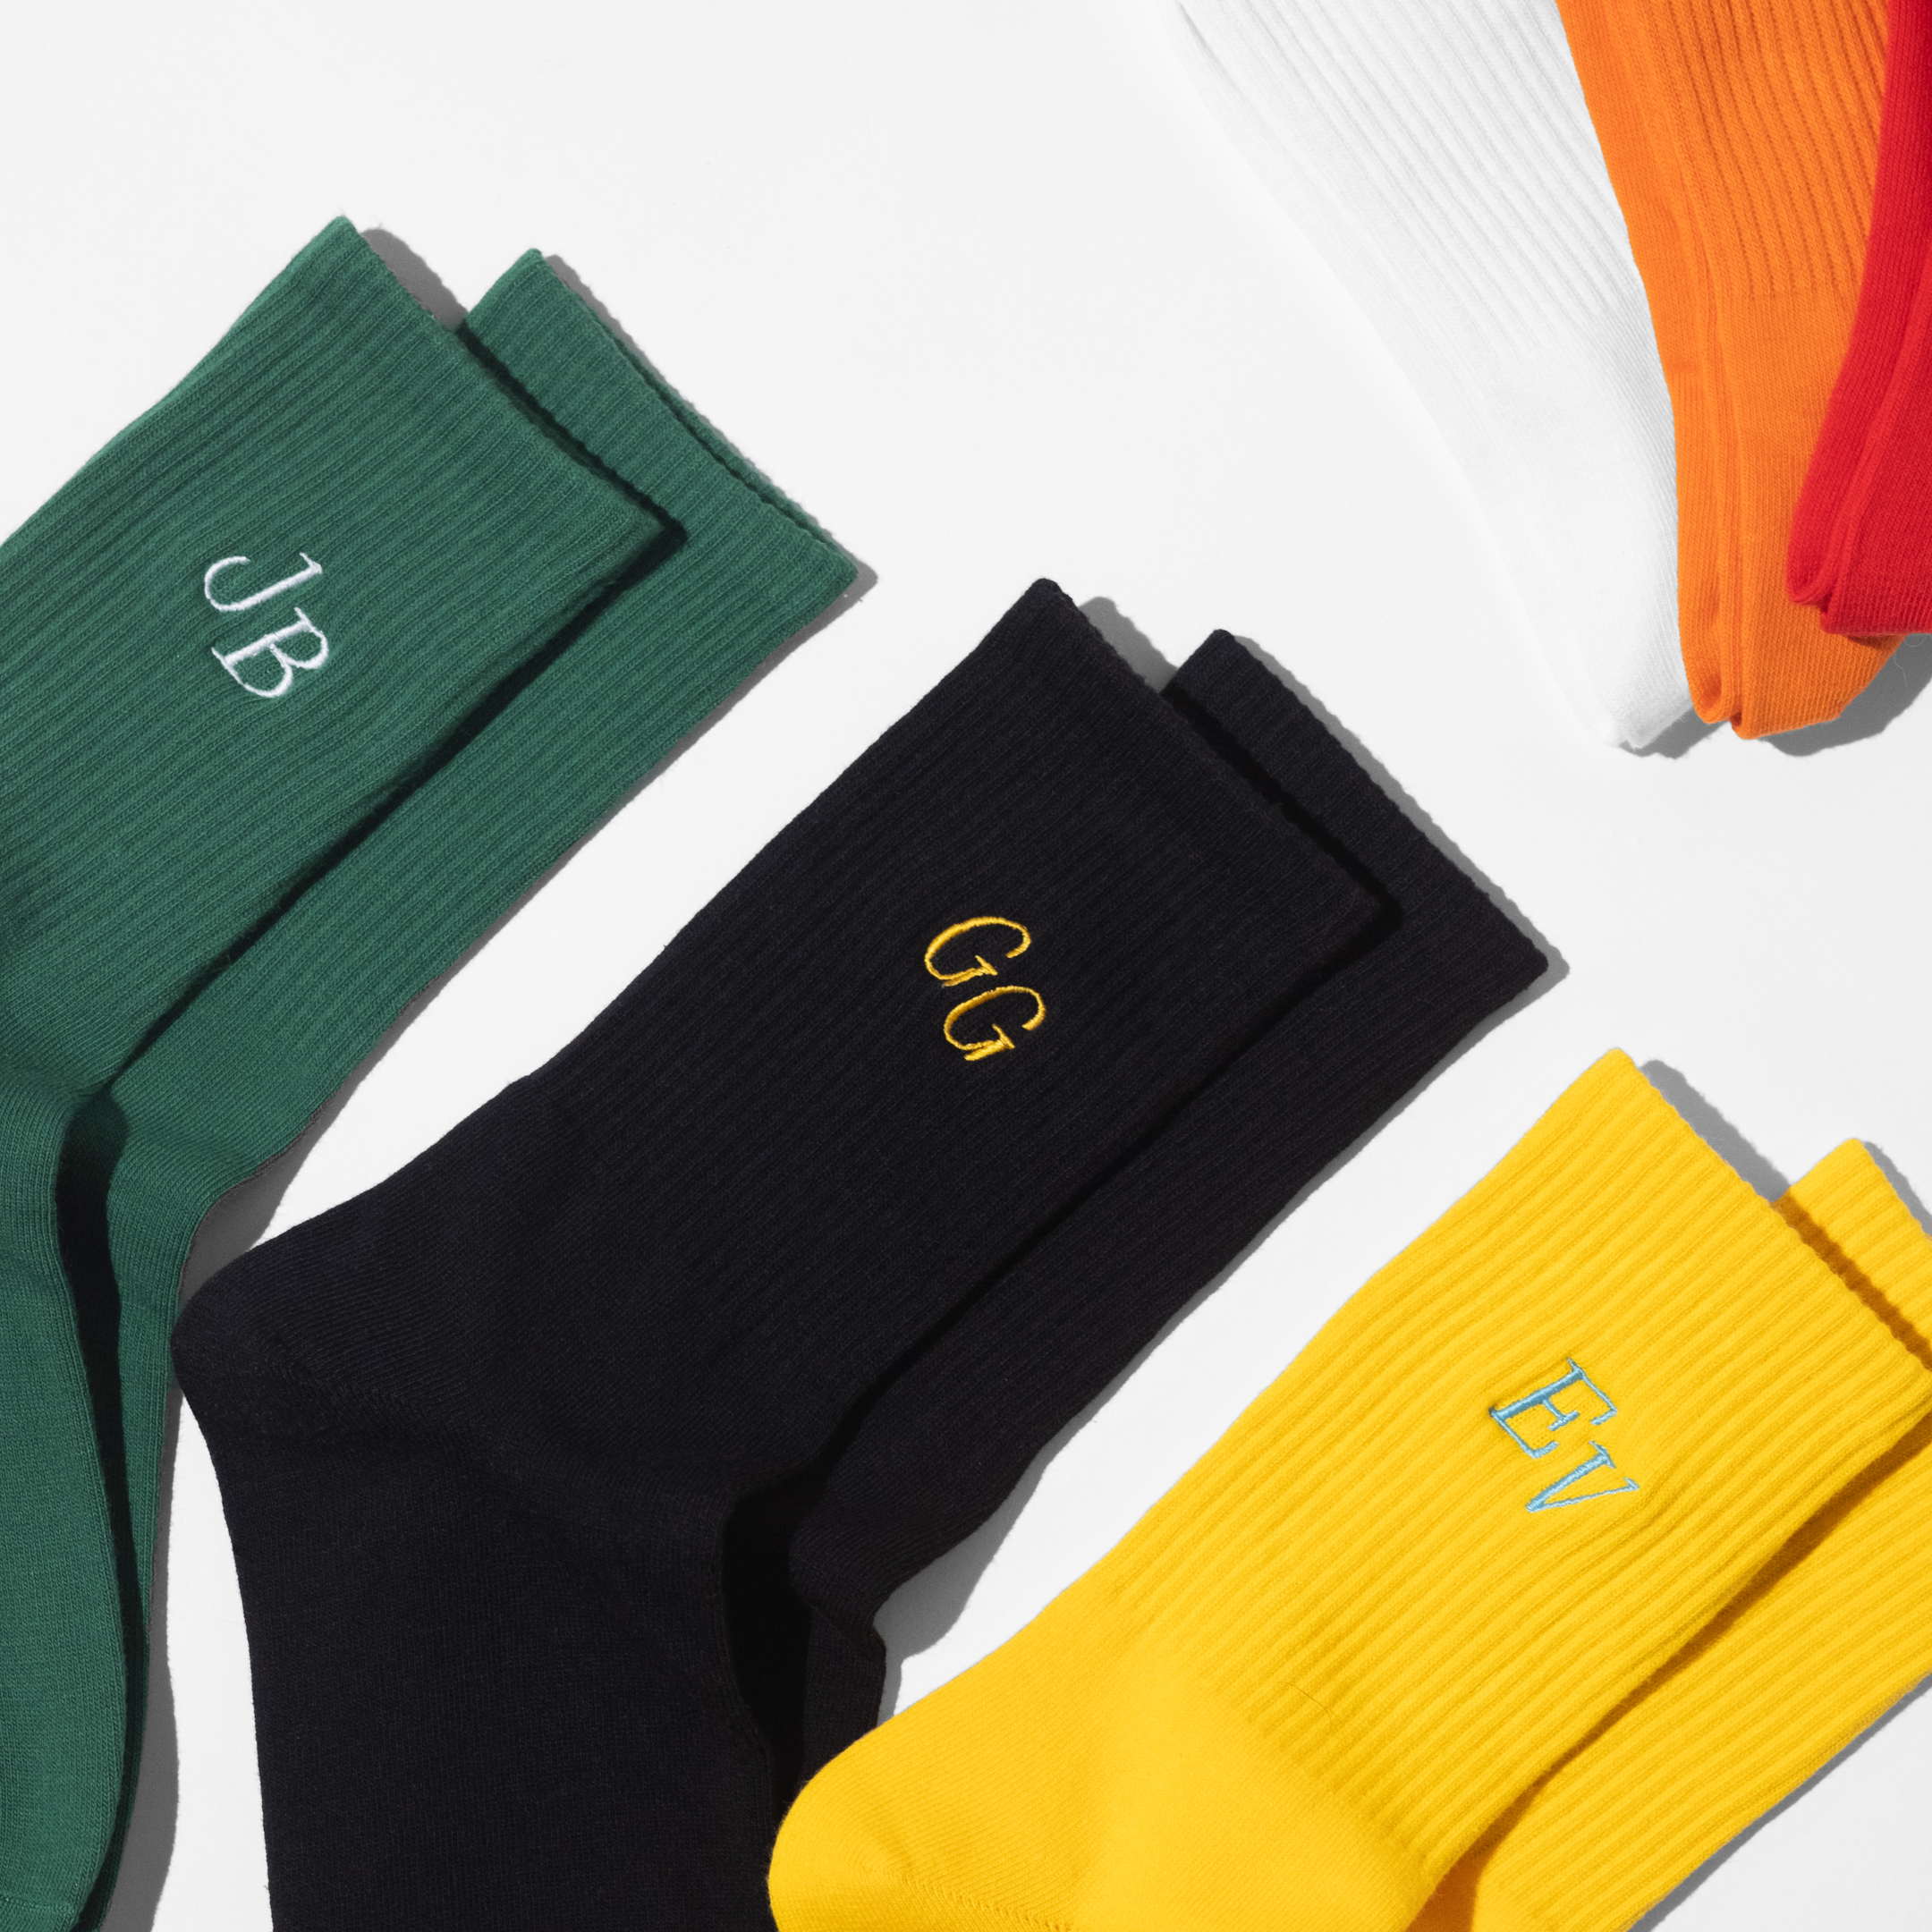 A collection of mens customised crew socks with initials embroidery on each sock of the pair.